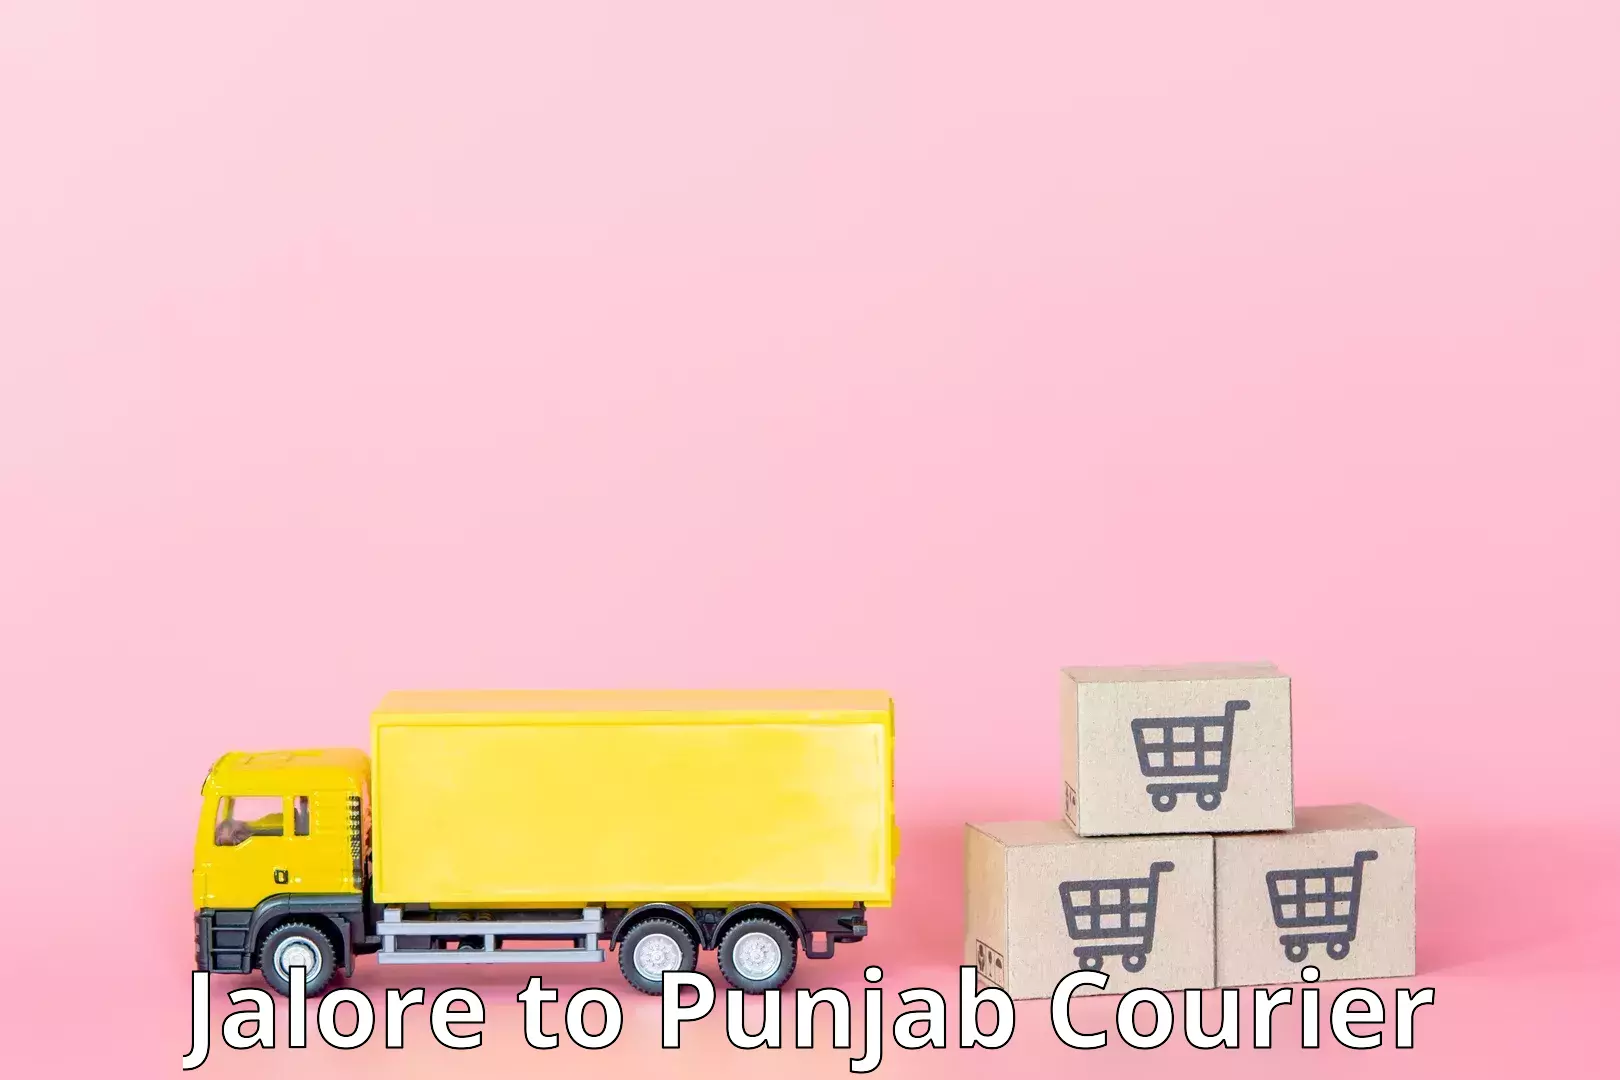 Round-the-clock parcel delivery Jalore to Ludhiana